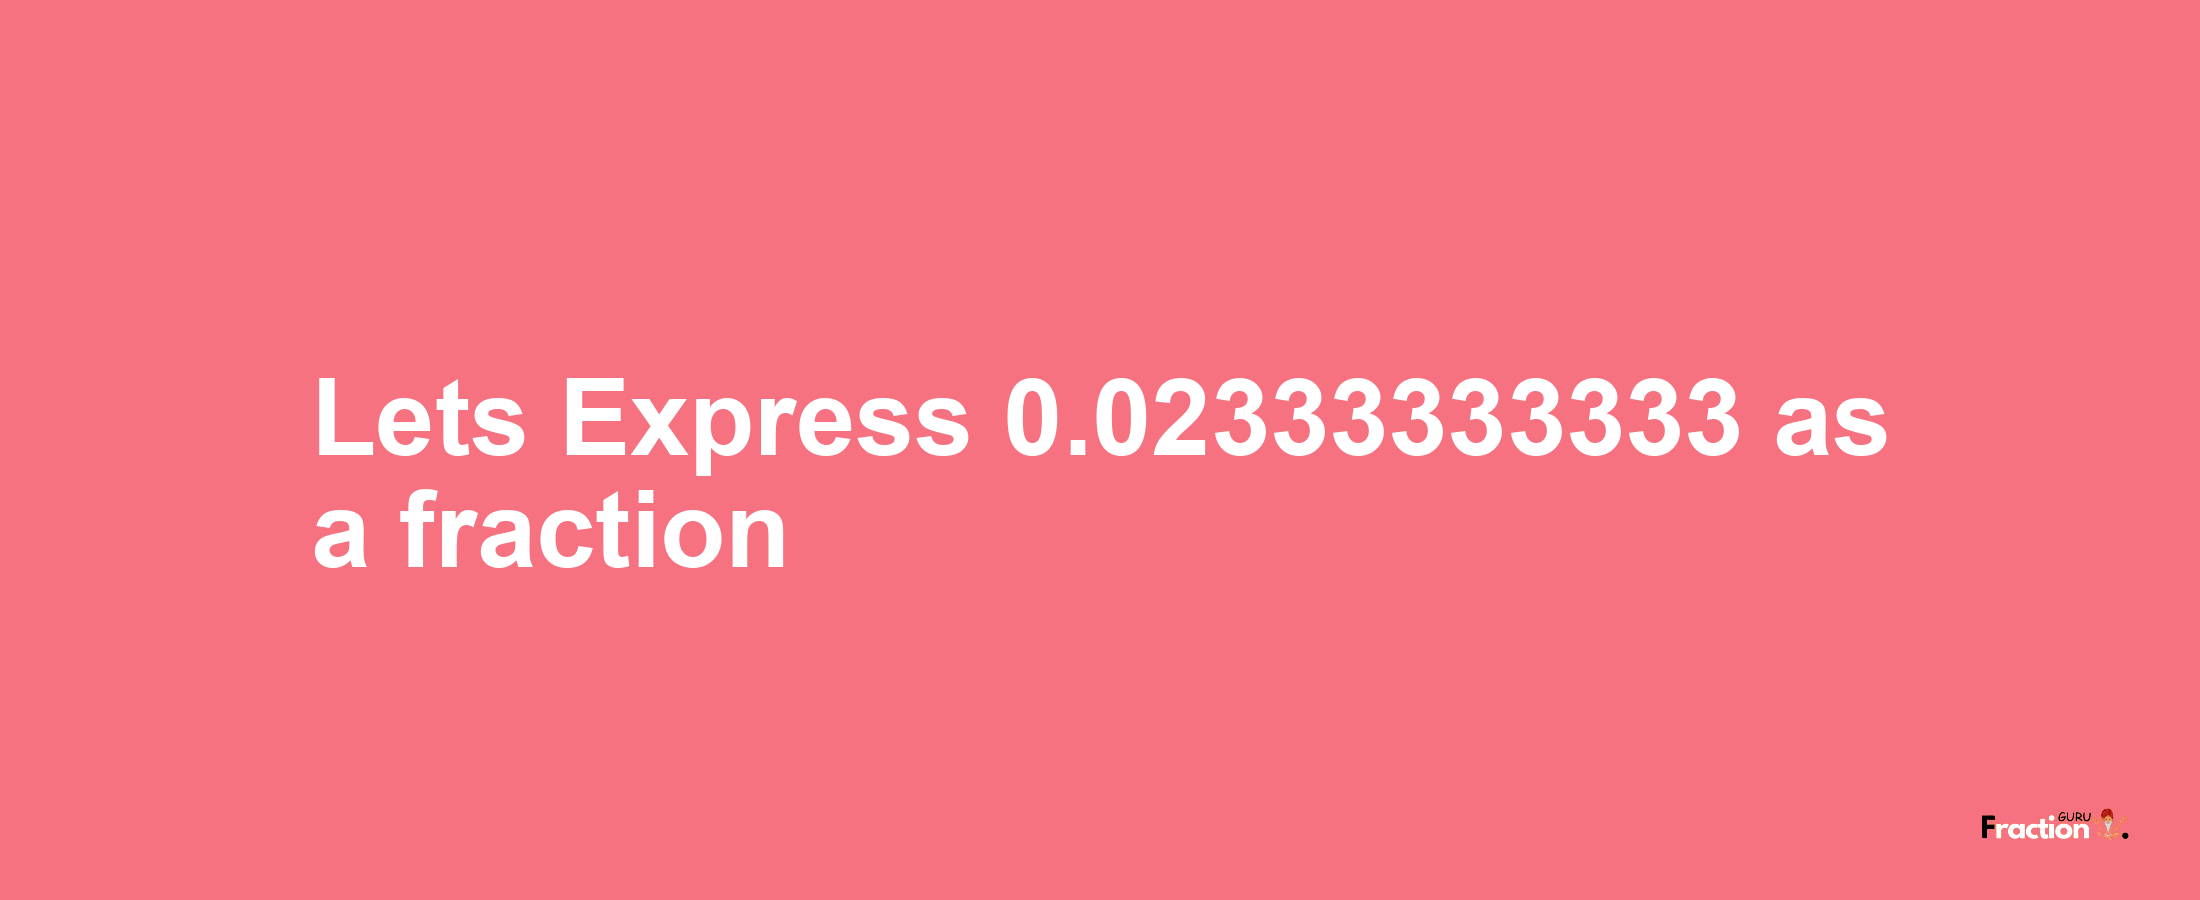 Lets Express 0.02333333333 as afraction